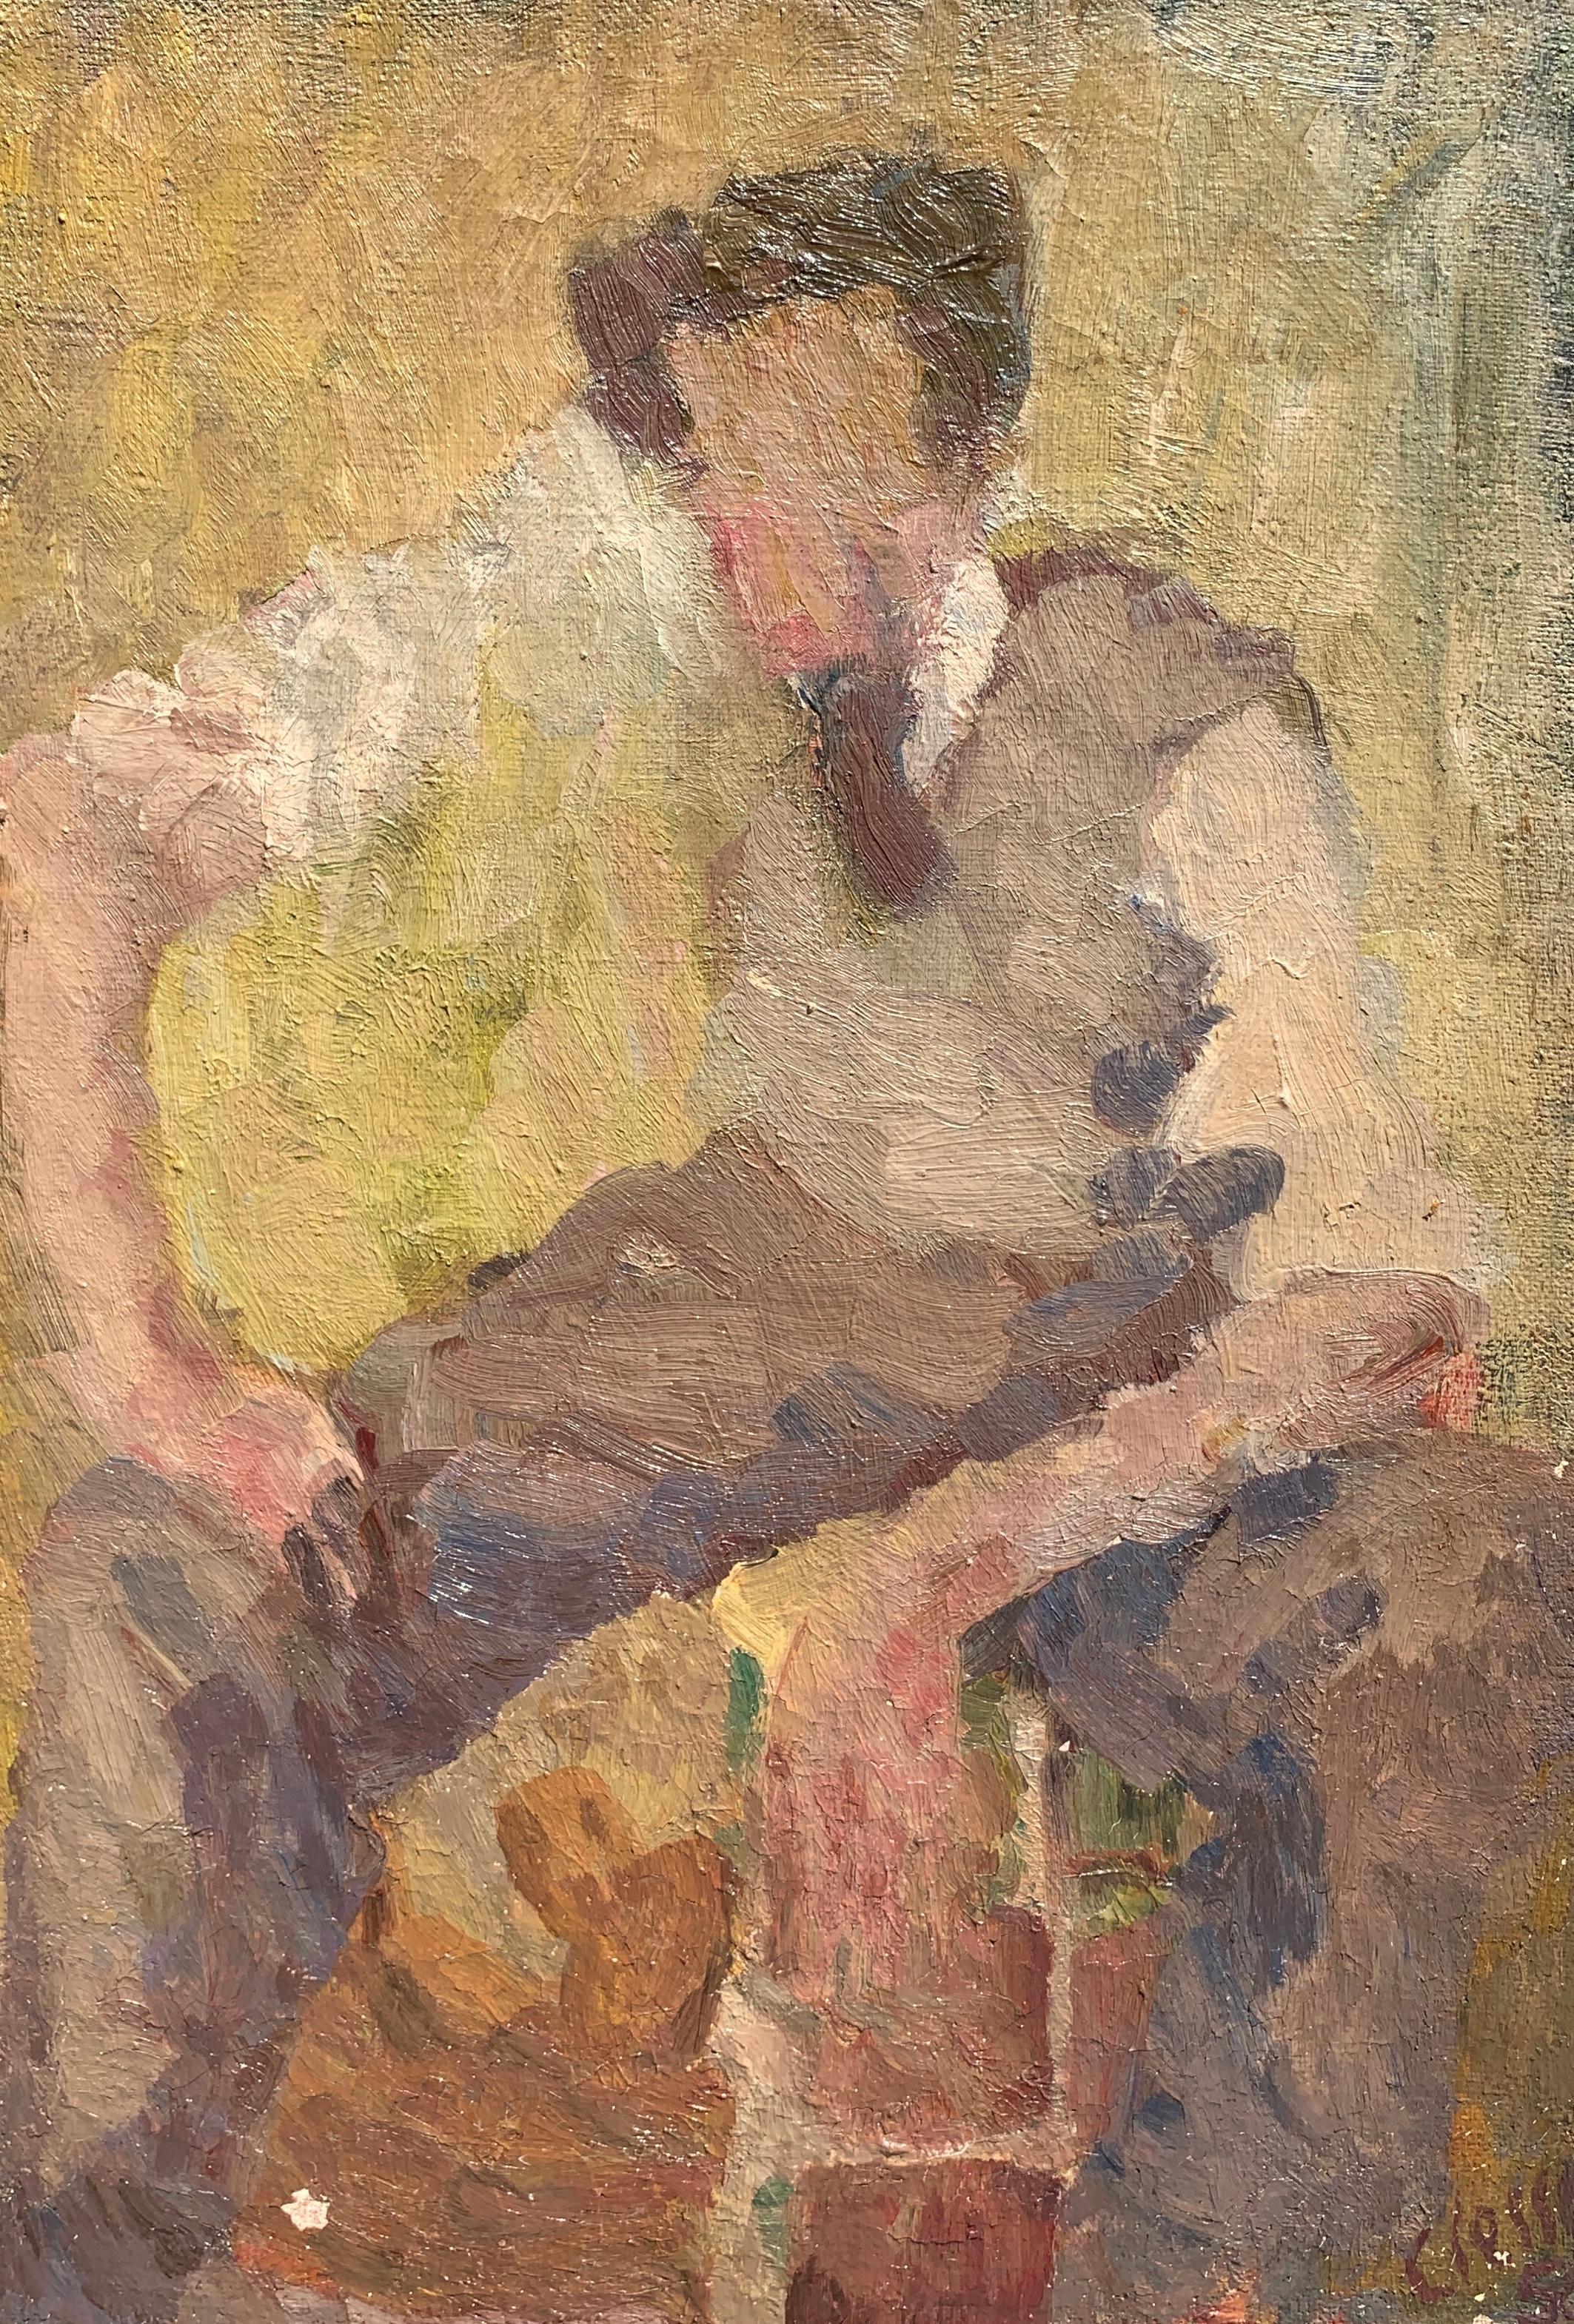 'Autoportrait' is a medium size oil on board painting created by French artist Daniel Clesse in 1958. Featuring a palette made of brown and ocher tones, the painting is an abstracted self-portrait of the artist who was born in Paris in 1932 and